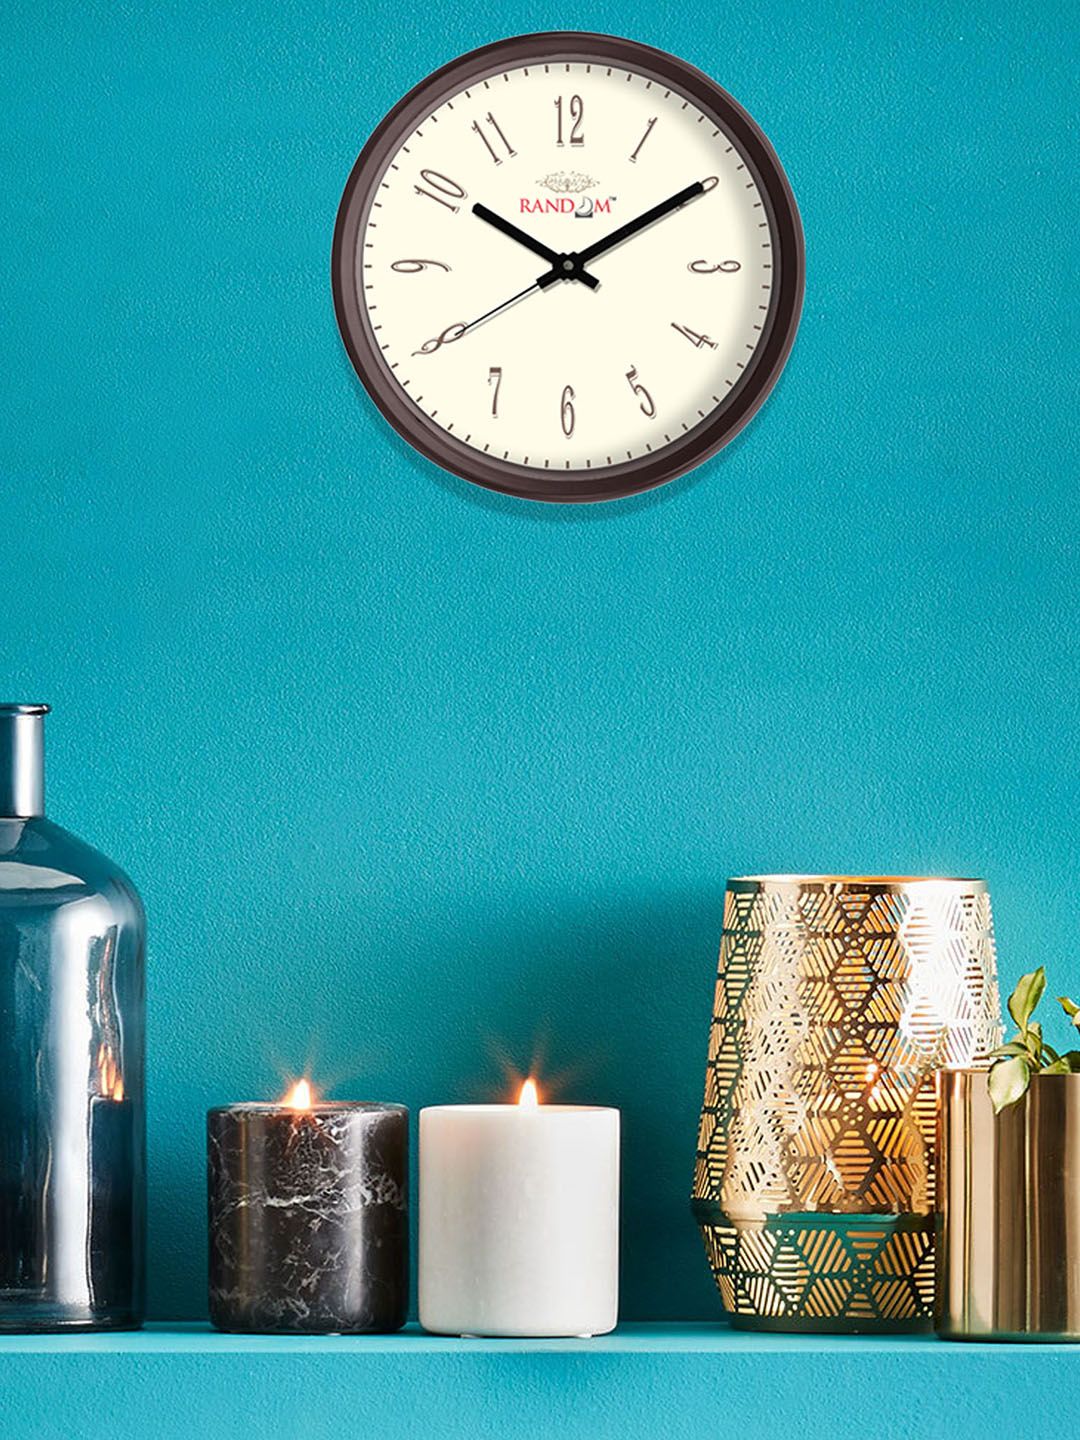 RANDOM Off-White Handcrafted Round Textured Analogue Wall Clock Price in India